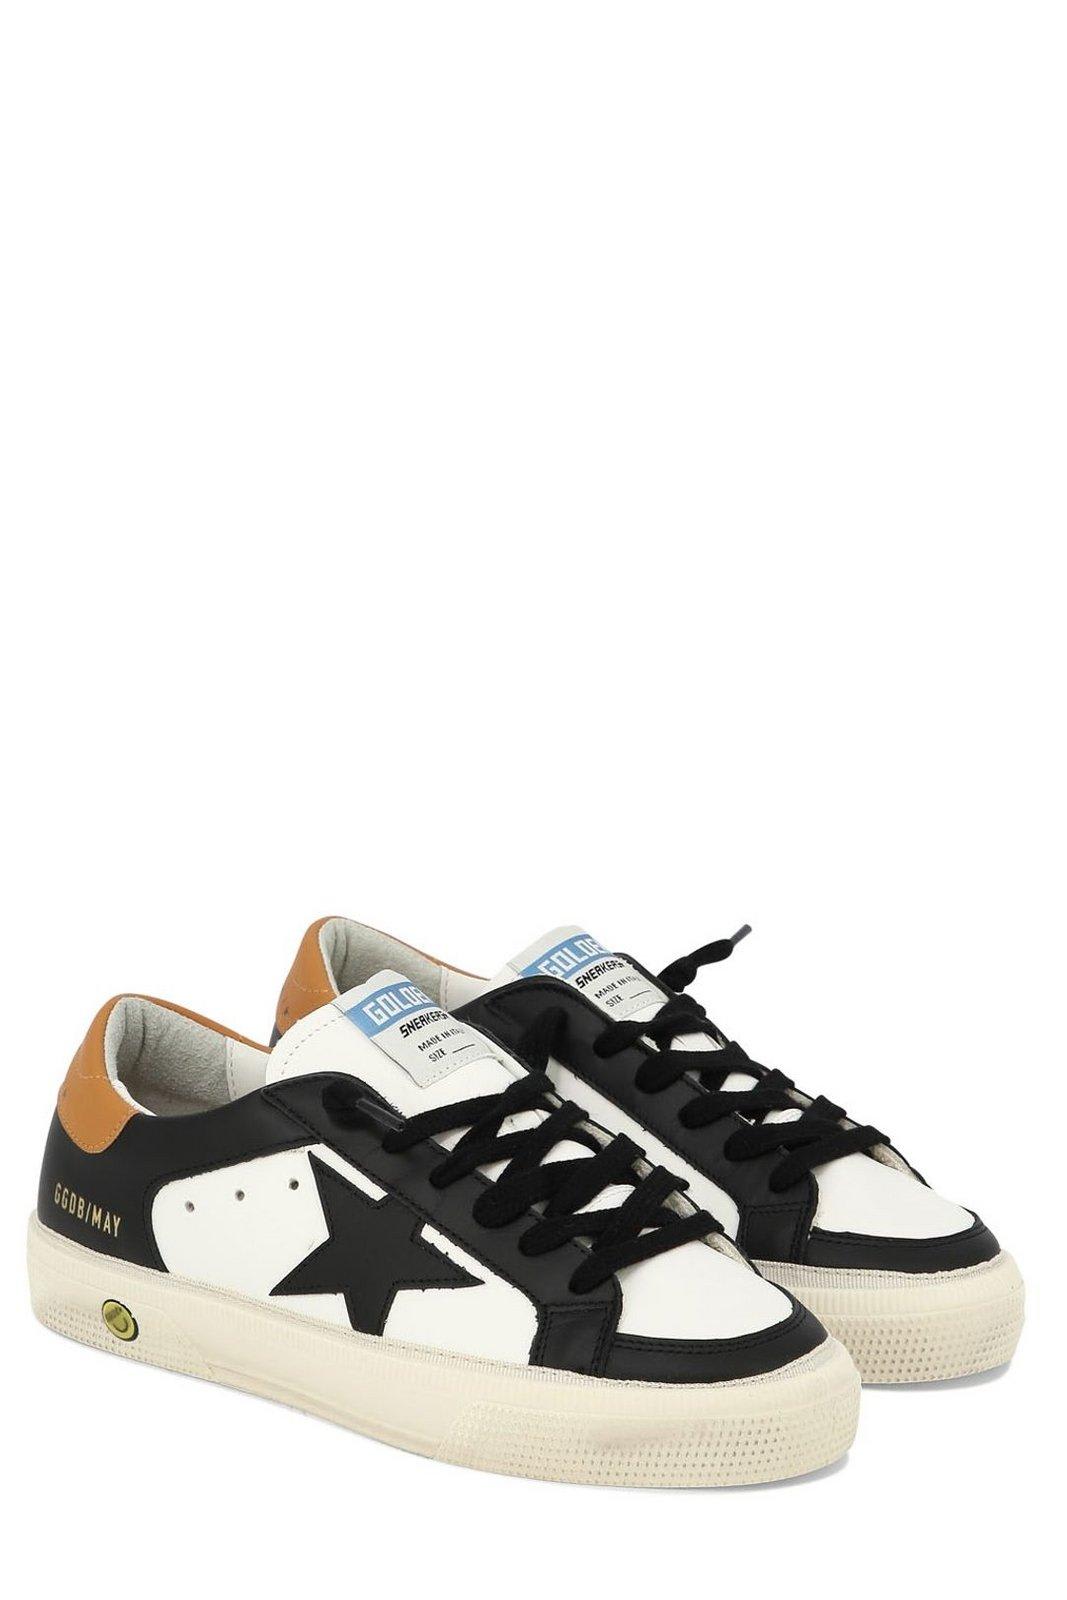 Shop Golden Goose May Star-patch Lace-up Sneakers In White/black/orange